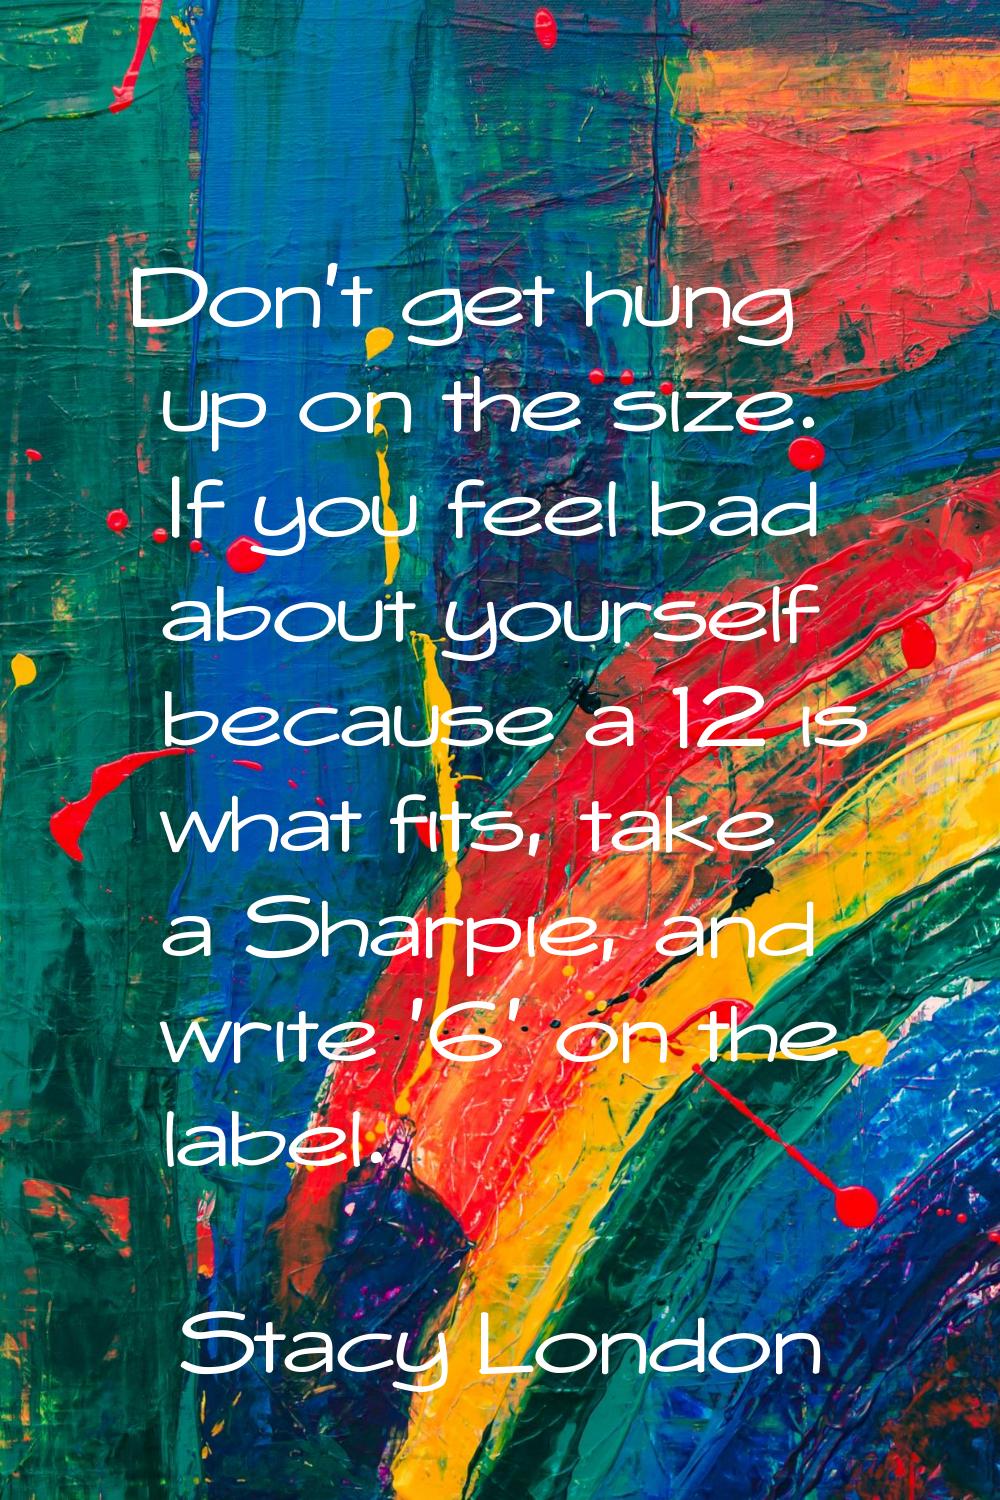 Don't get hung up on the size. If you feel bad about yourself because a 12 is what fits, take a Sha